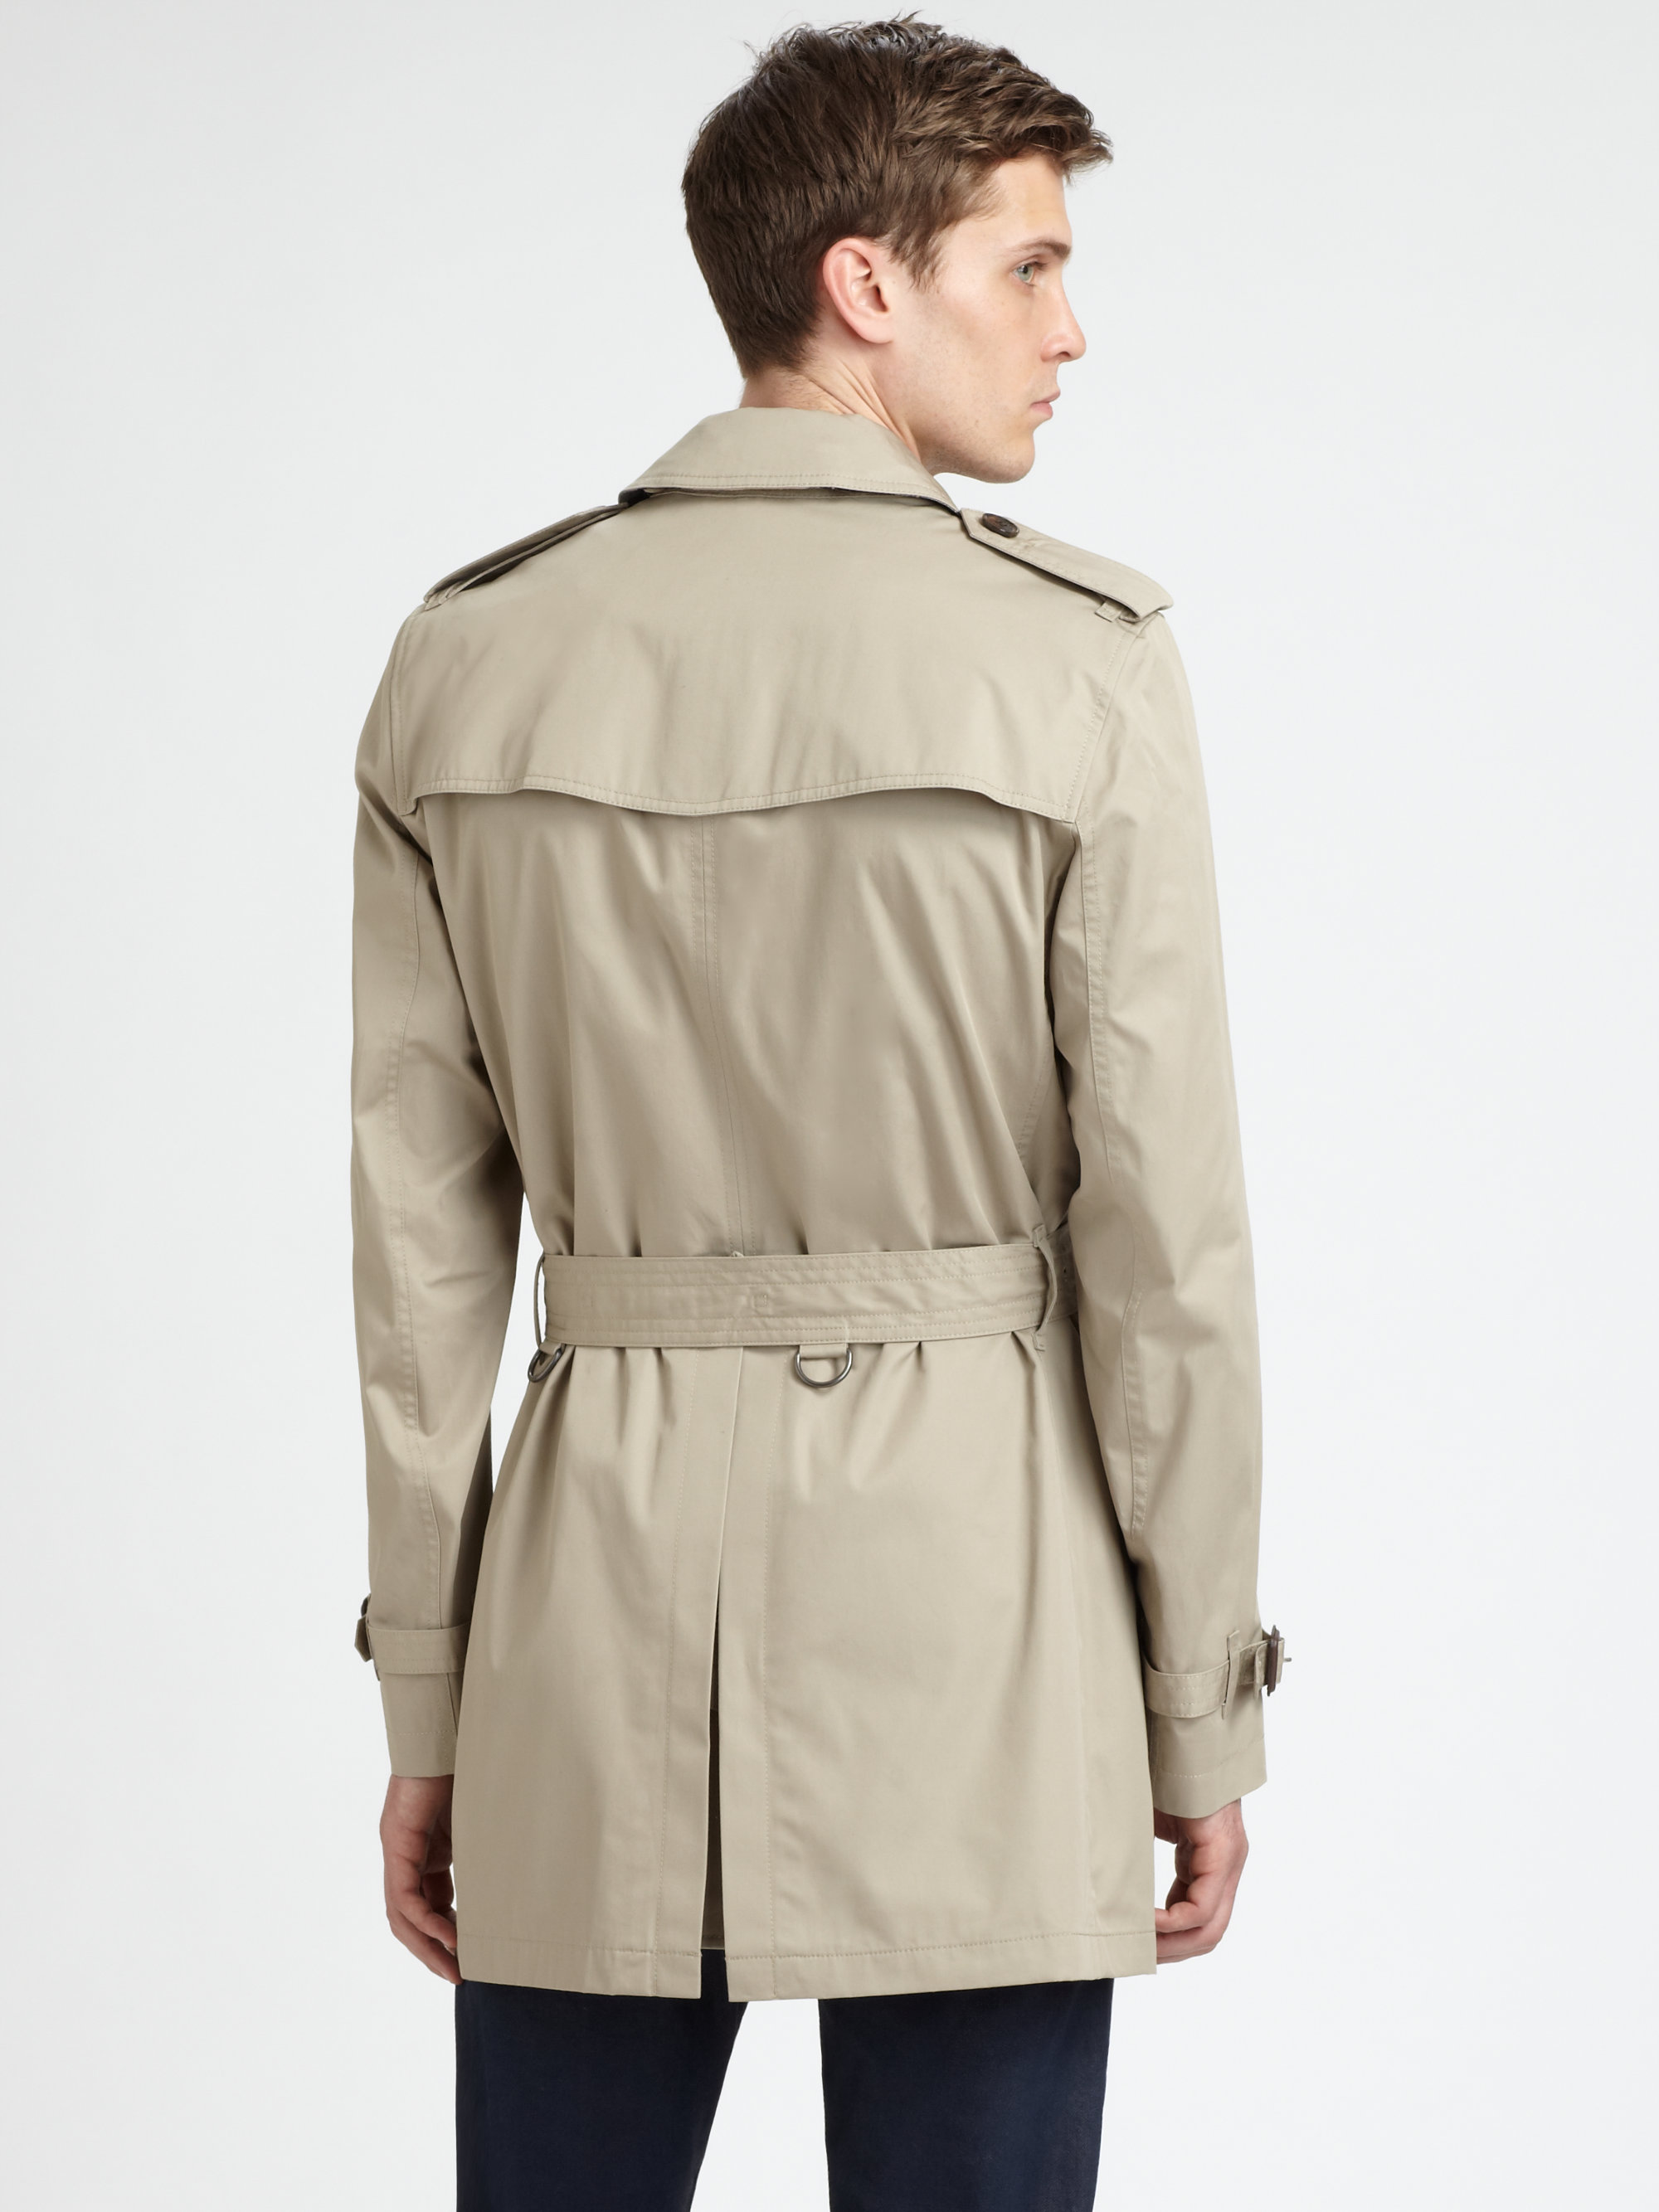 Burberry Brit Britton Double Breasted Trench Coat in Taupe 